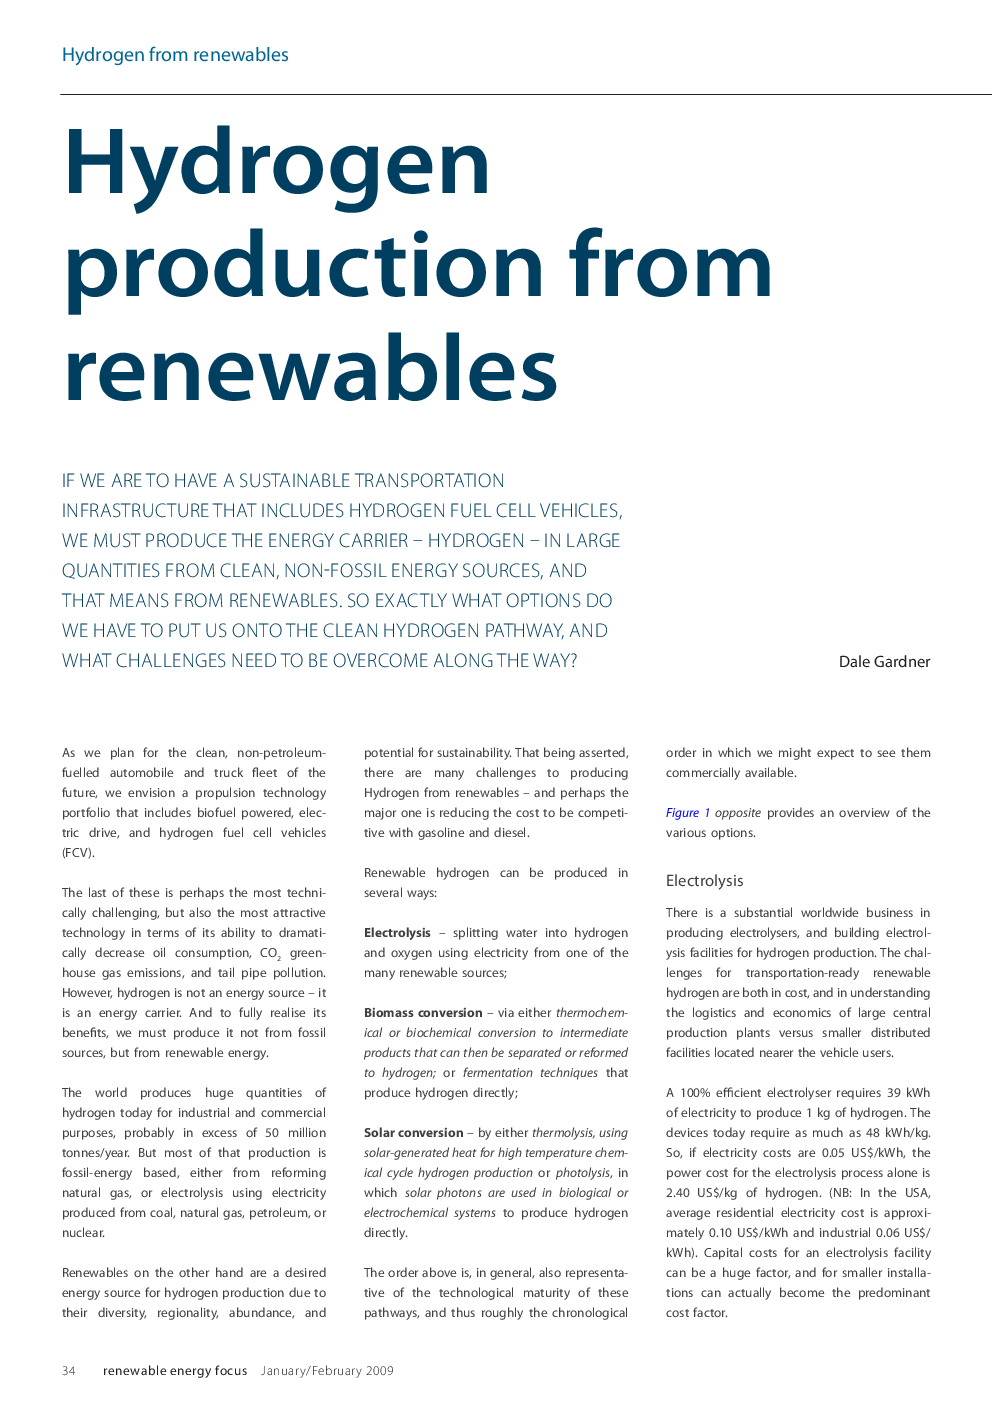 Hydrogen production from renewables